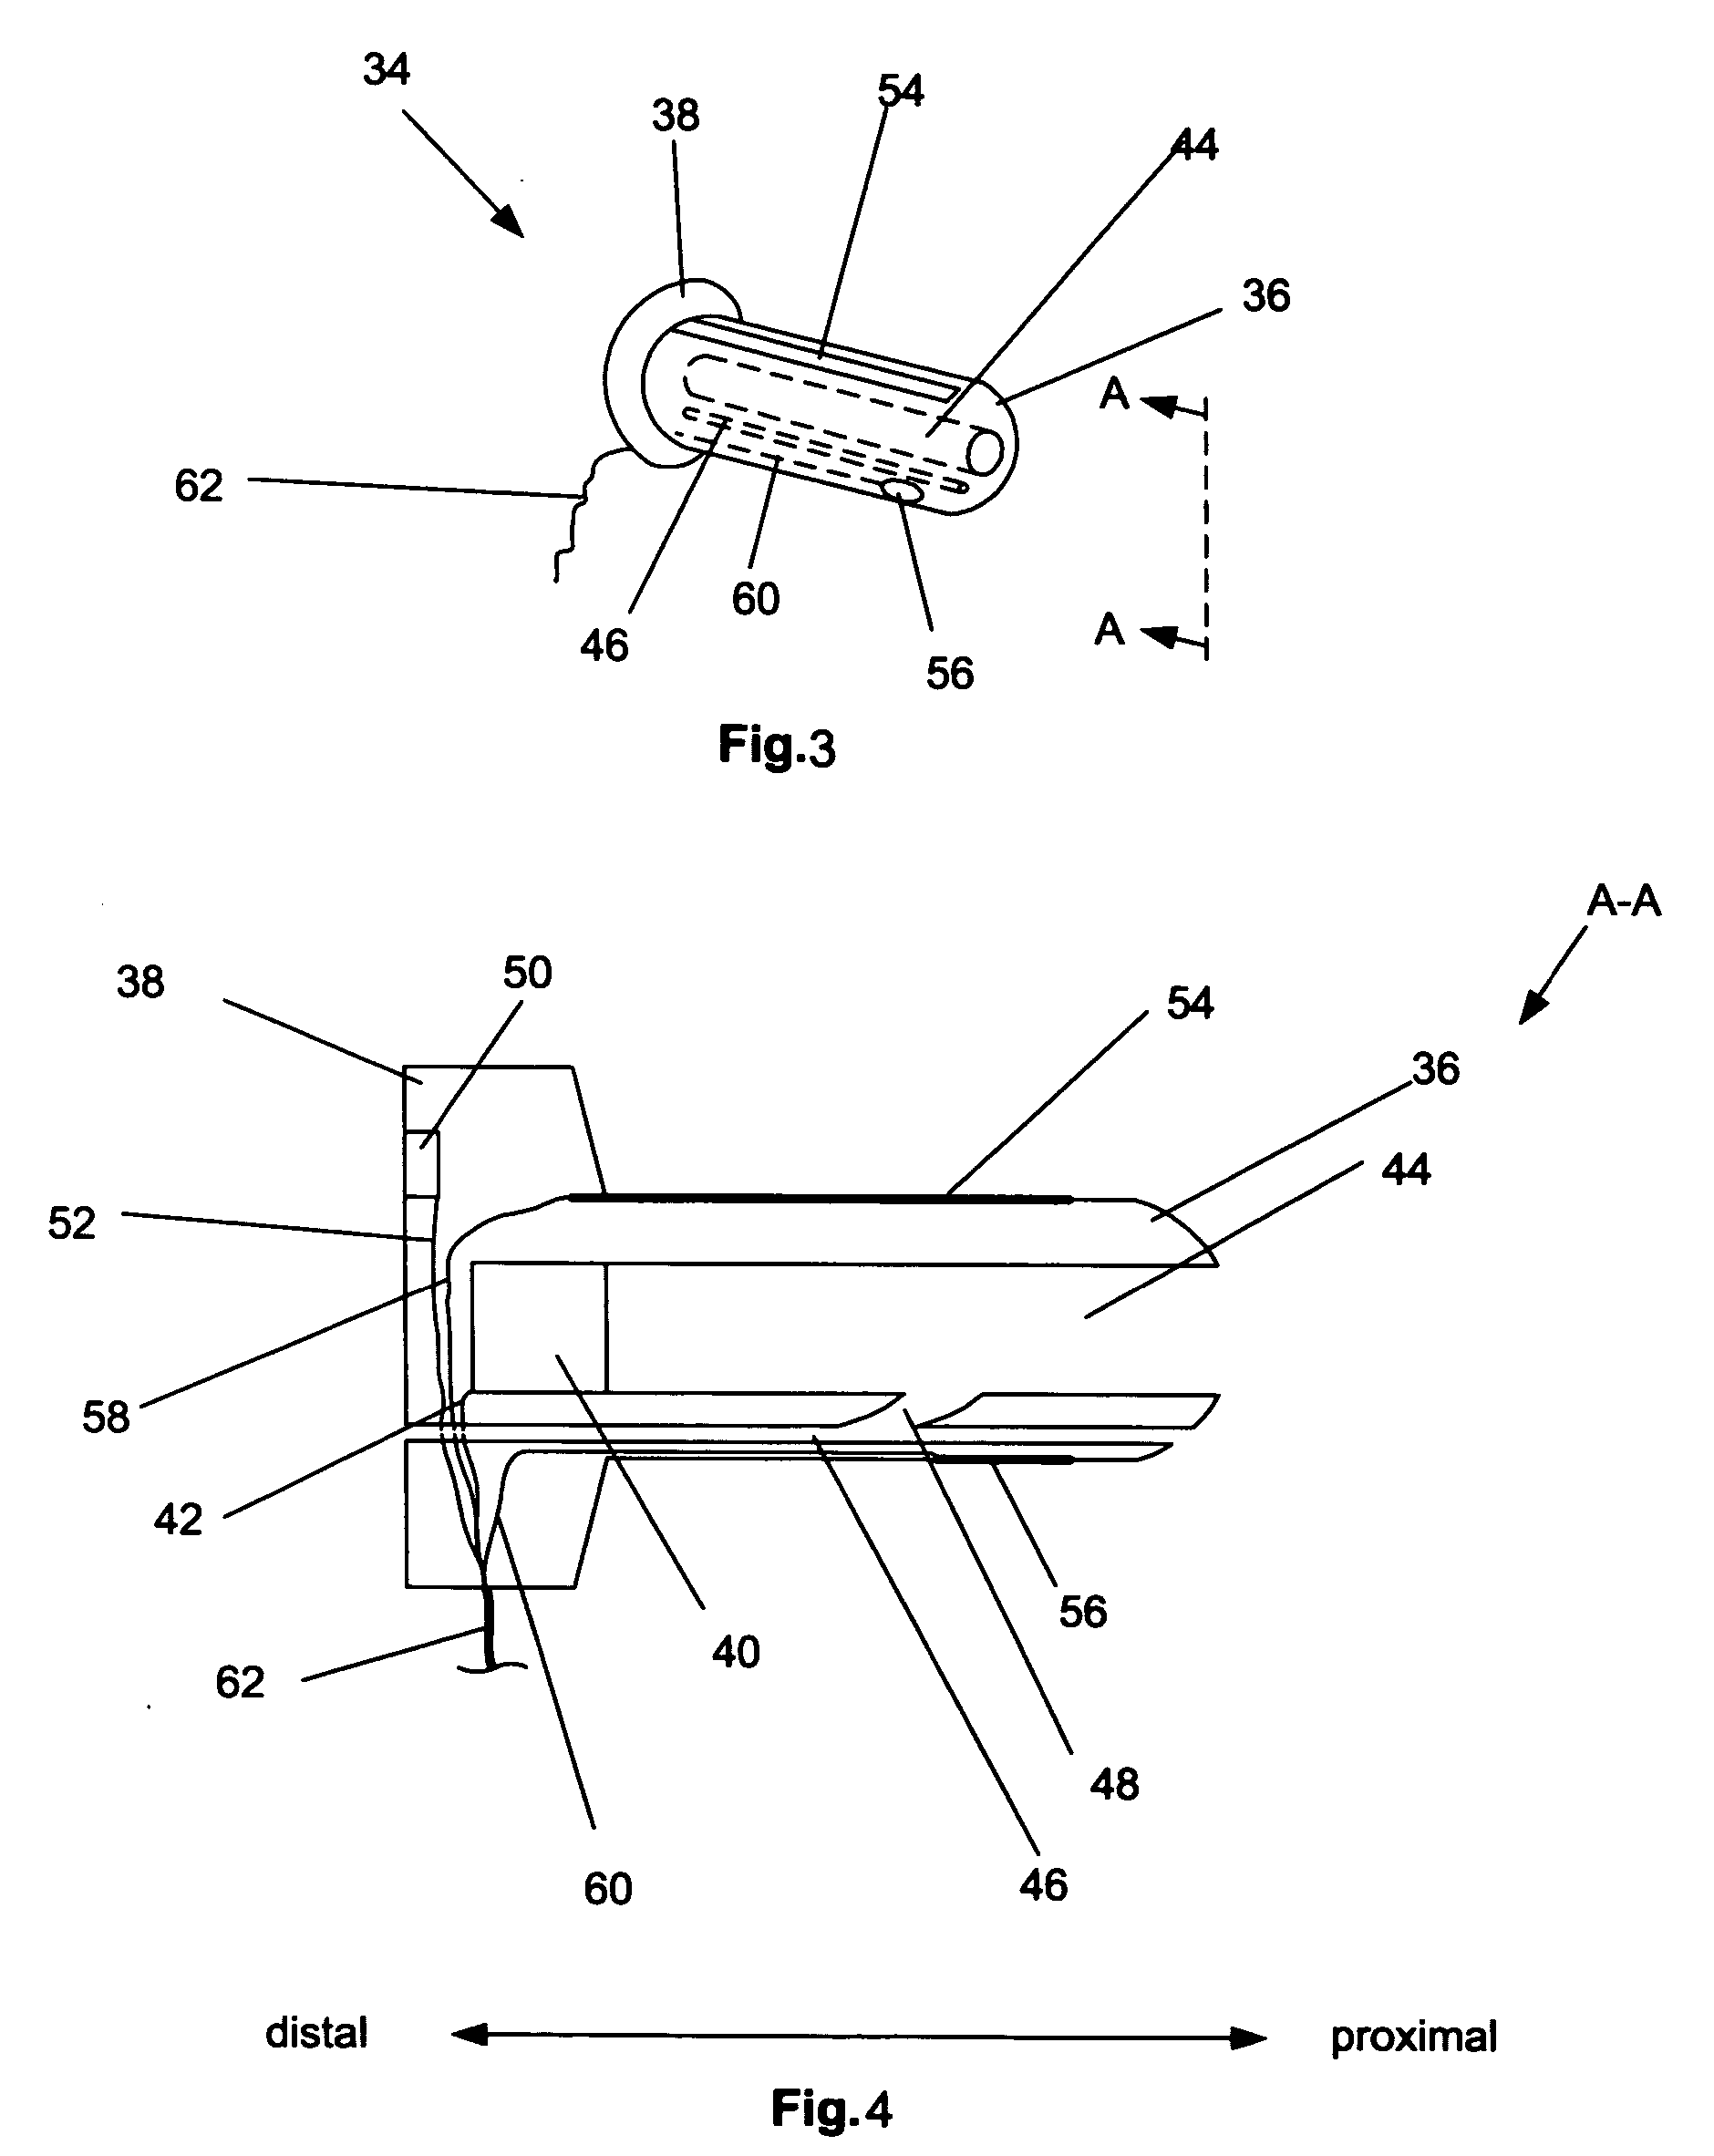 Aural rehabilitation system and a method of using the same